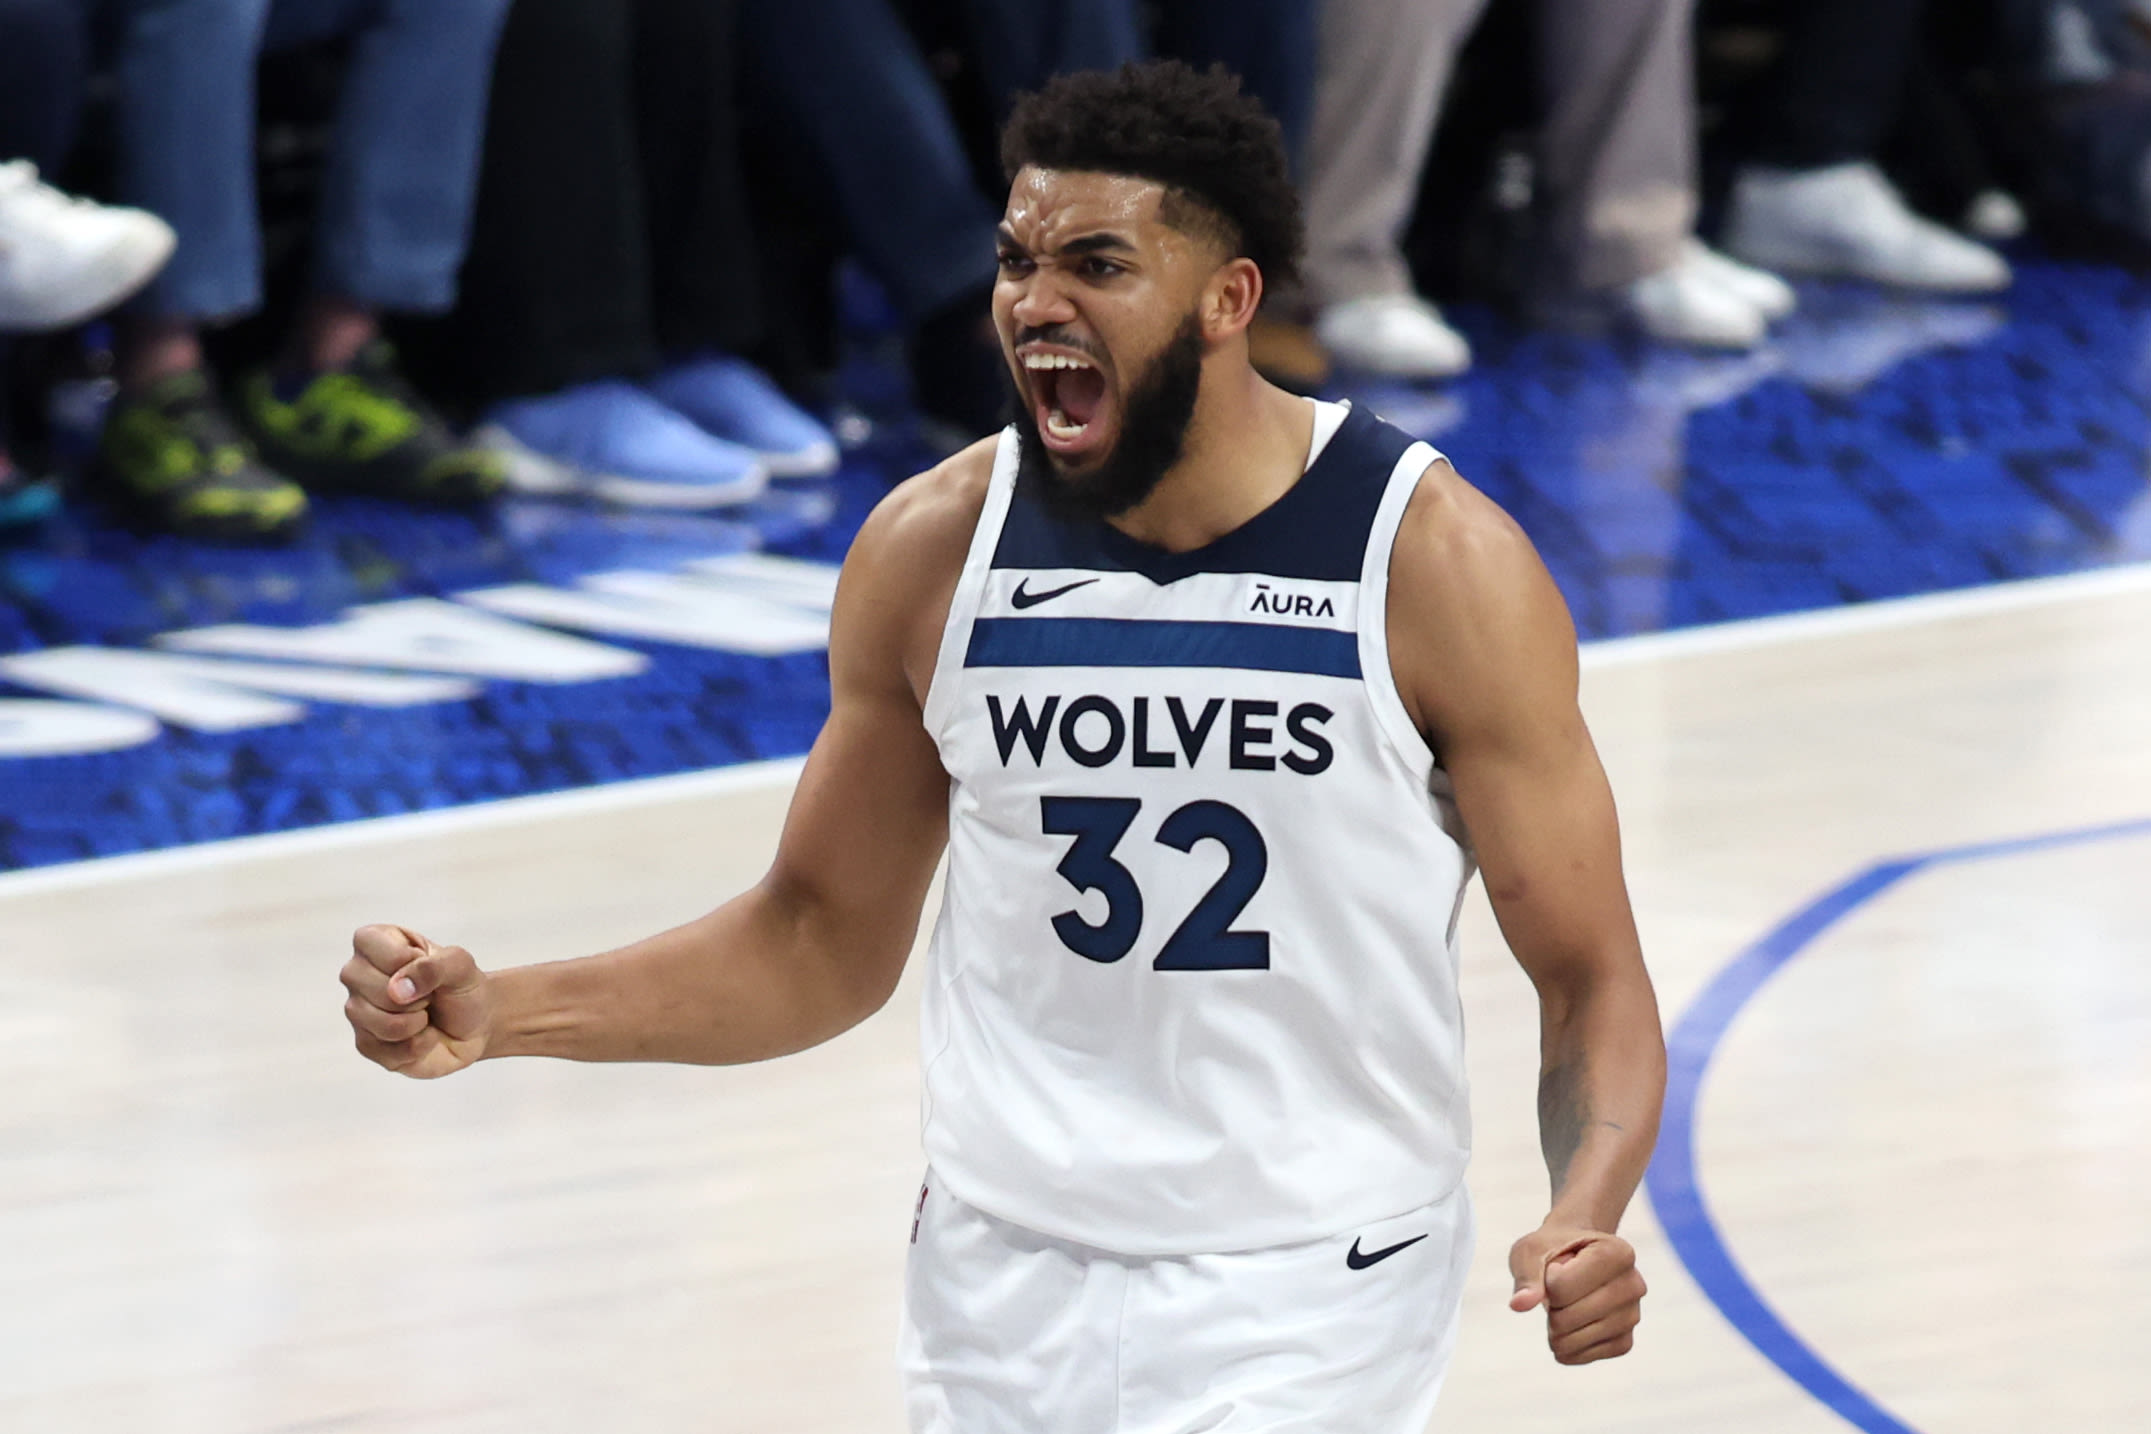 NBA playoffs: Karl-Anthony Towns, Timberwolves finally grab win over Mavericks to avoid sweep